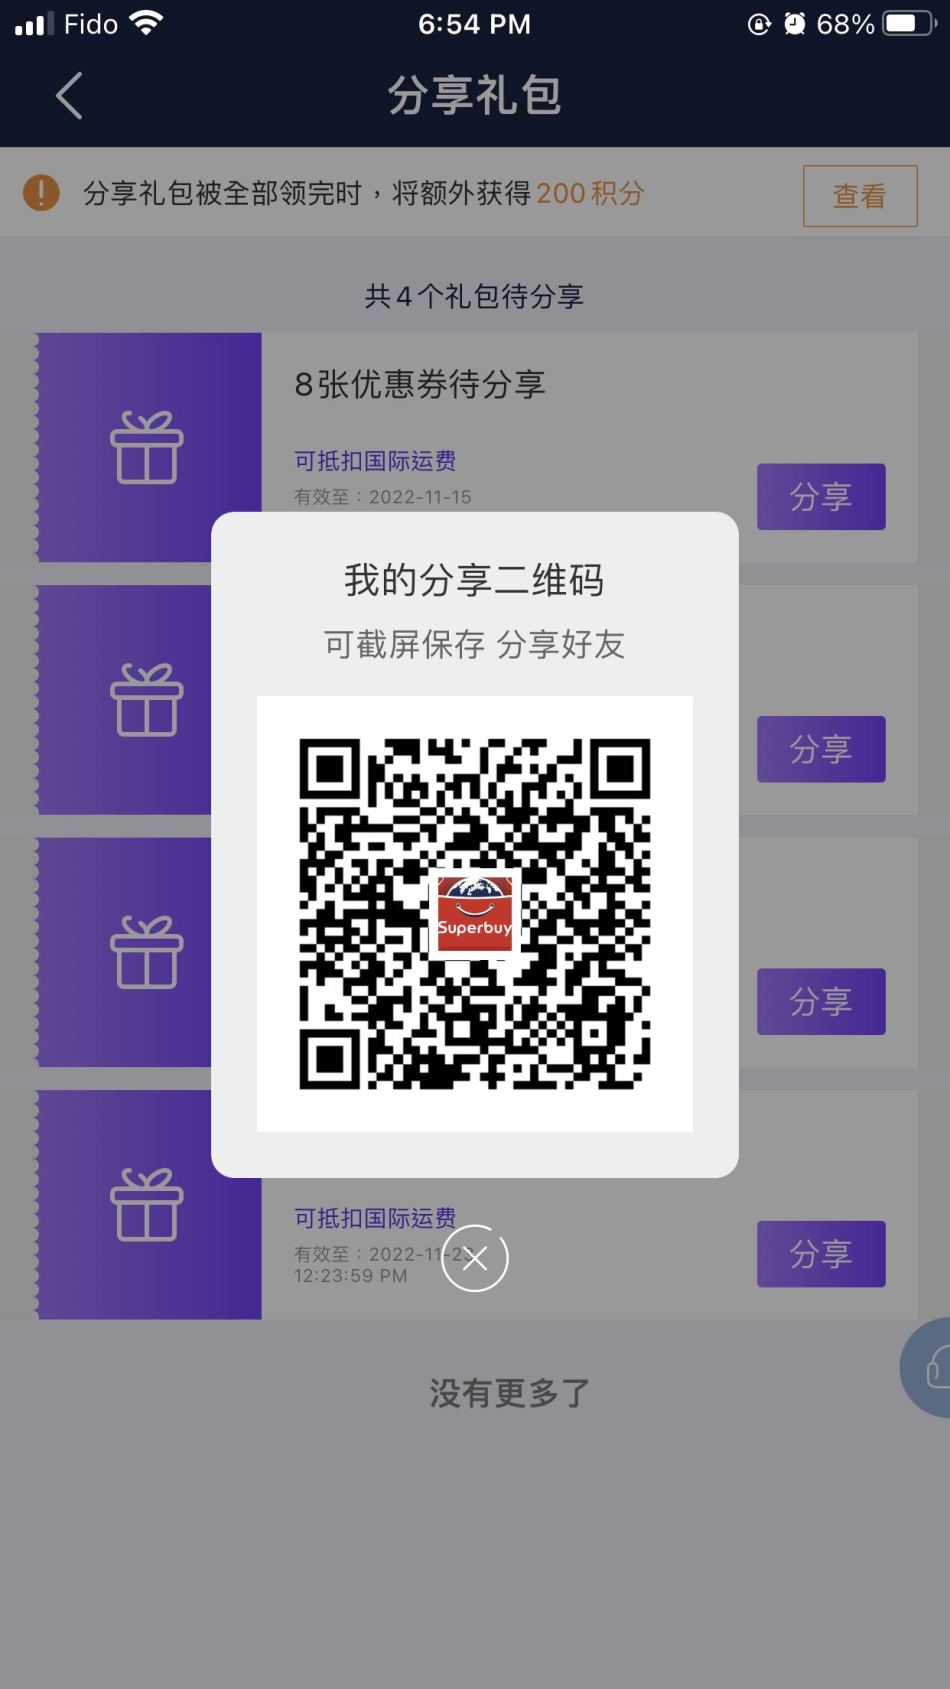 https://img1.superbuy.com/images/consult/2021/12/27/df7d4171d17a41a197014651d790beed.jpg?x-oss-process=image/resize,w_950